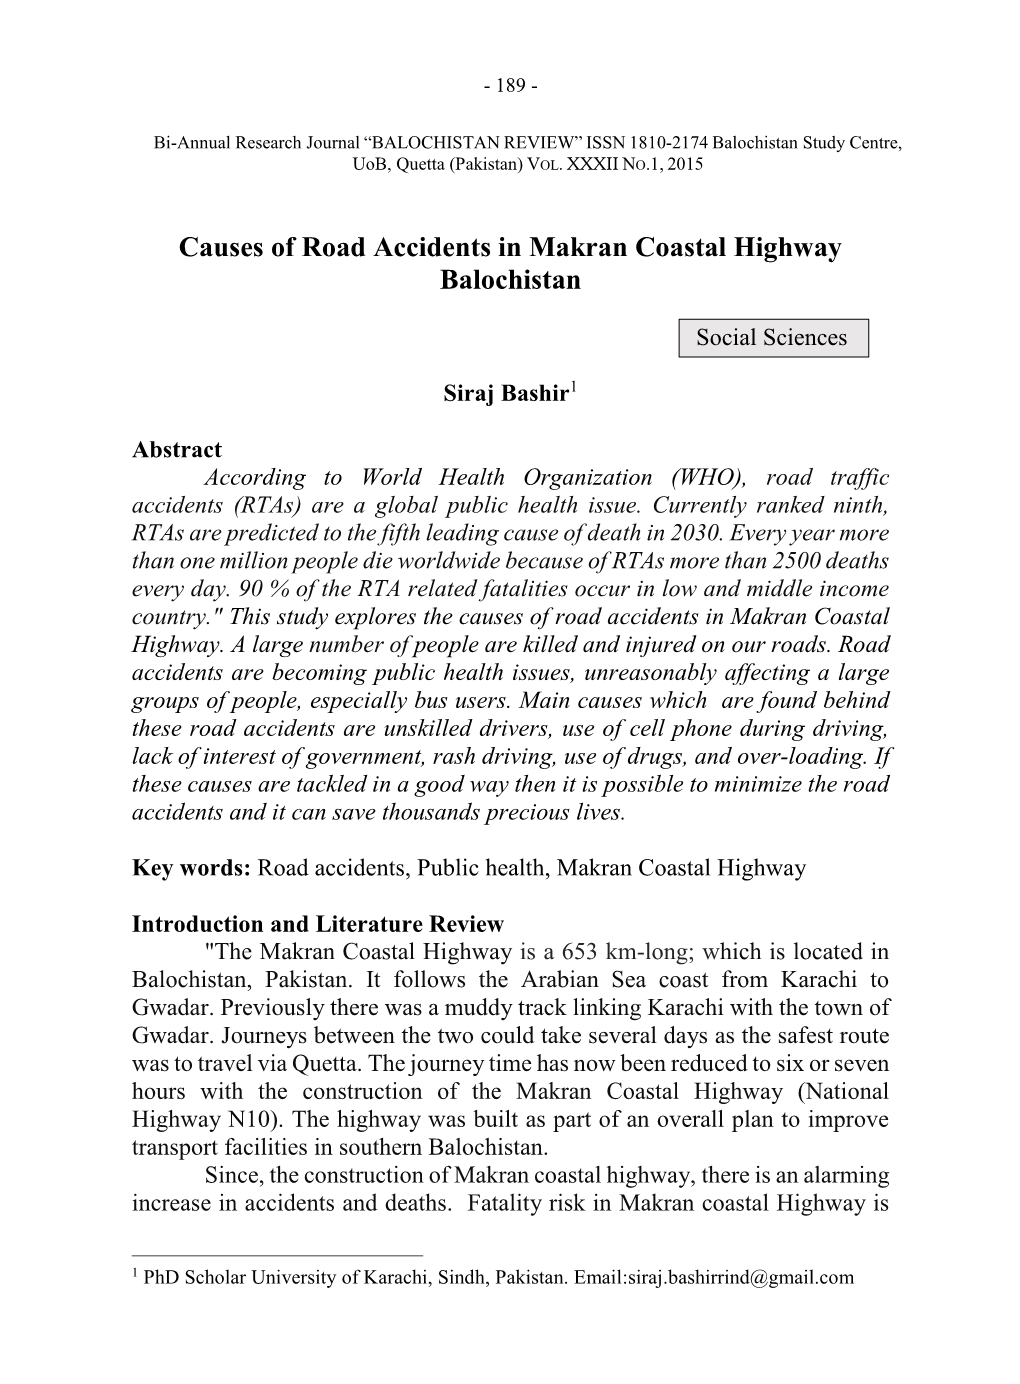 Causes of Road Accidents in Makran Coastal Highway Balochistan